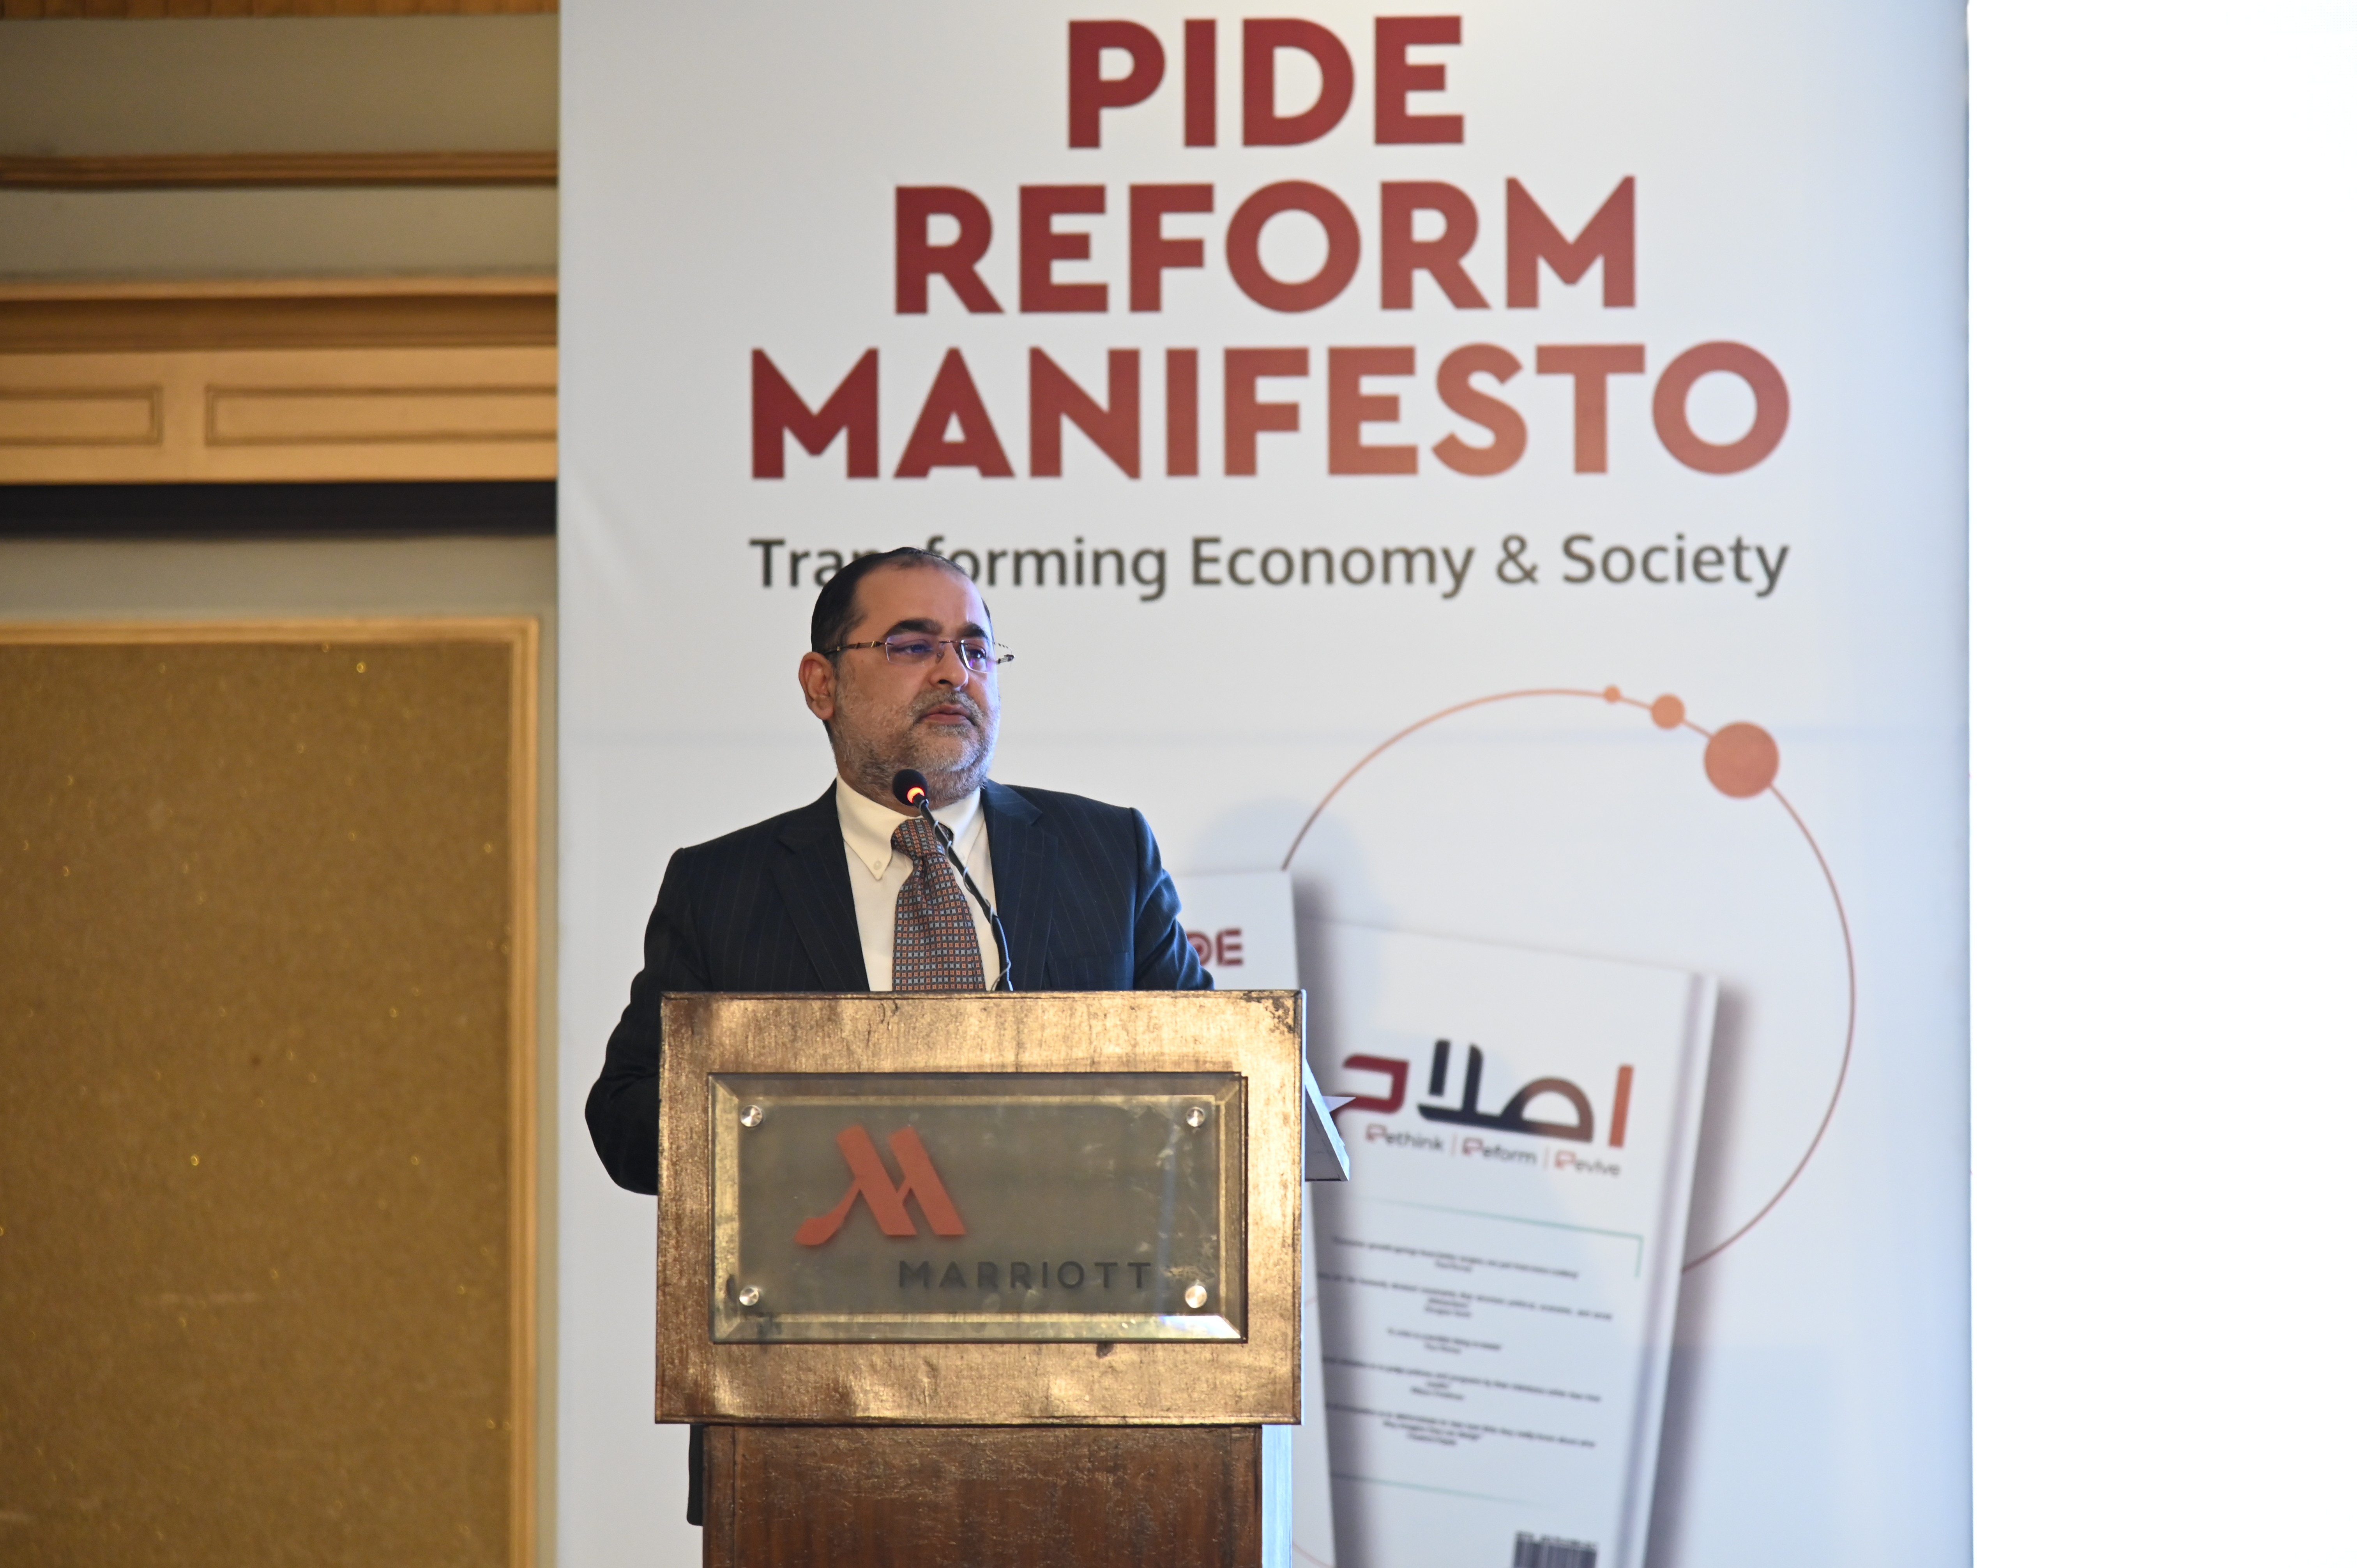 An economic researcher expressing his view on PIDE reform manifesto in transforming the economy and society